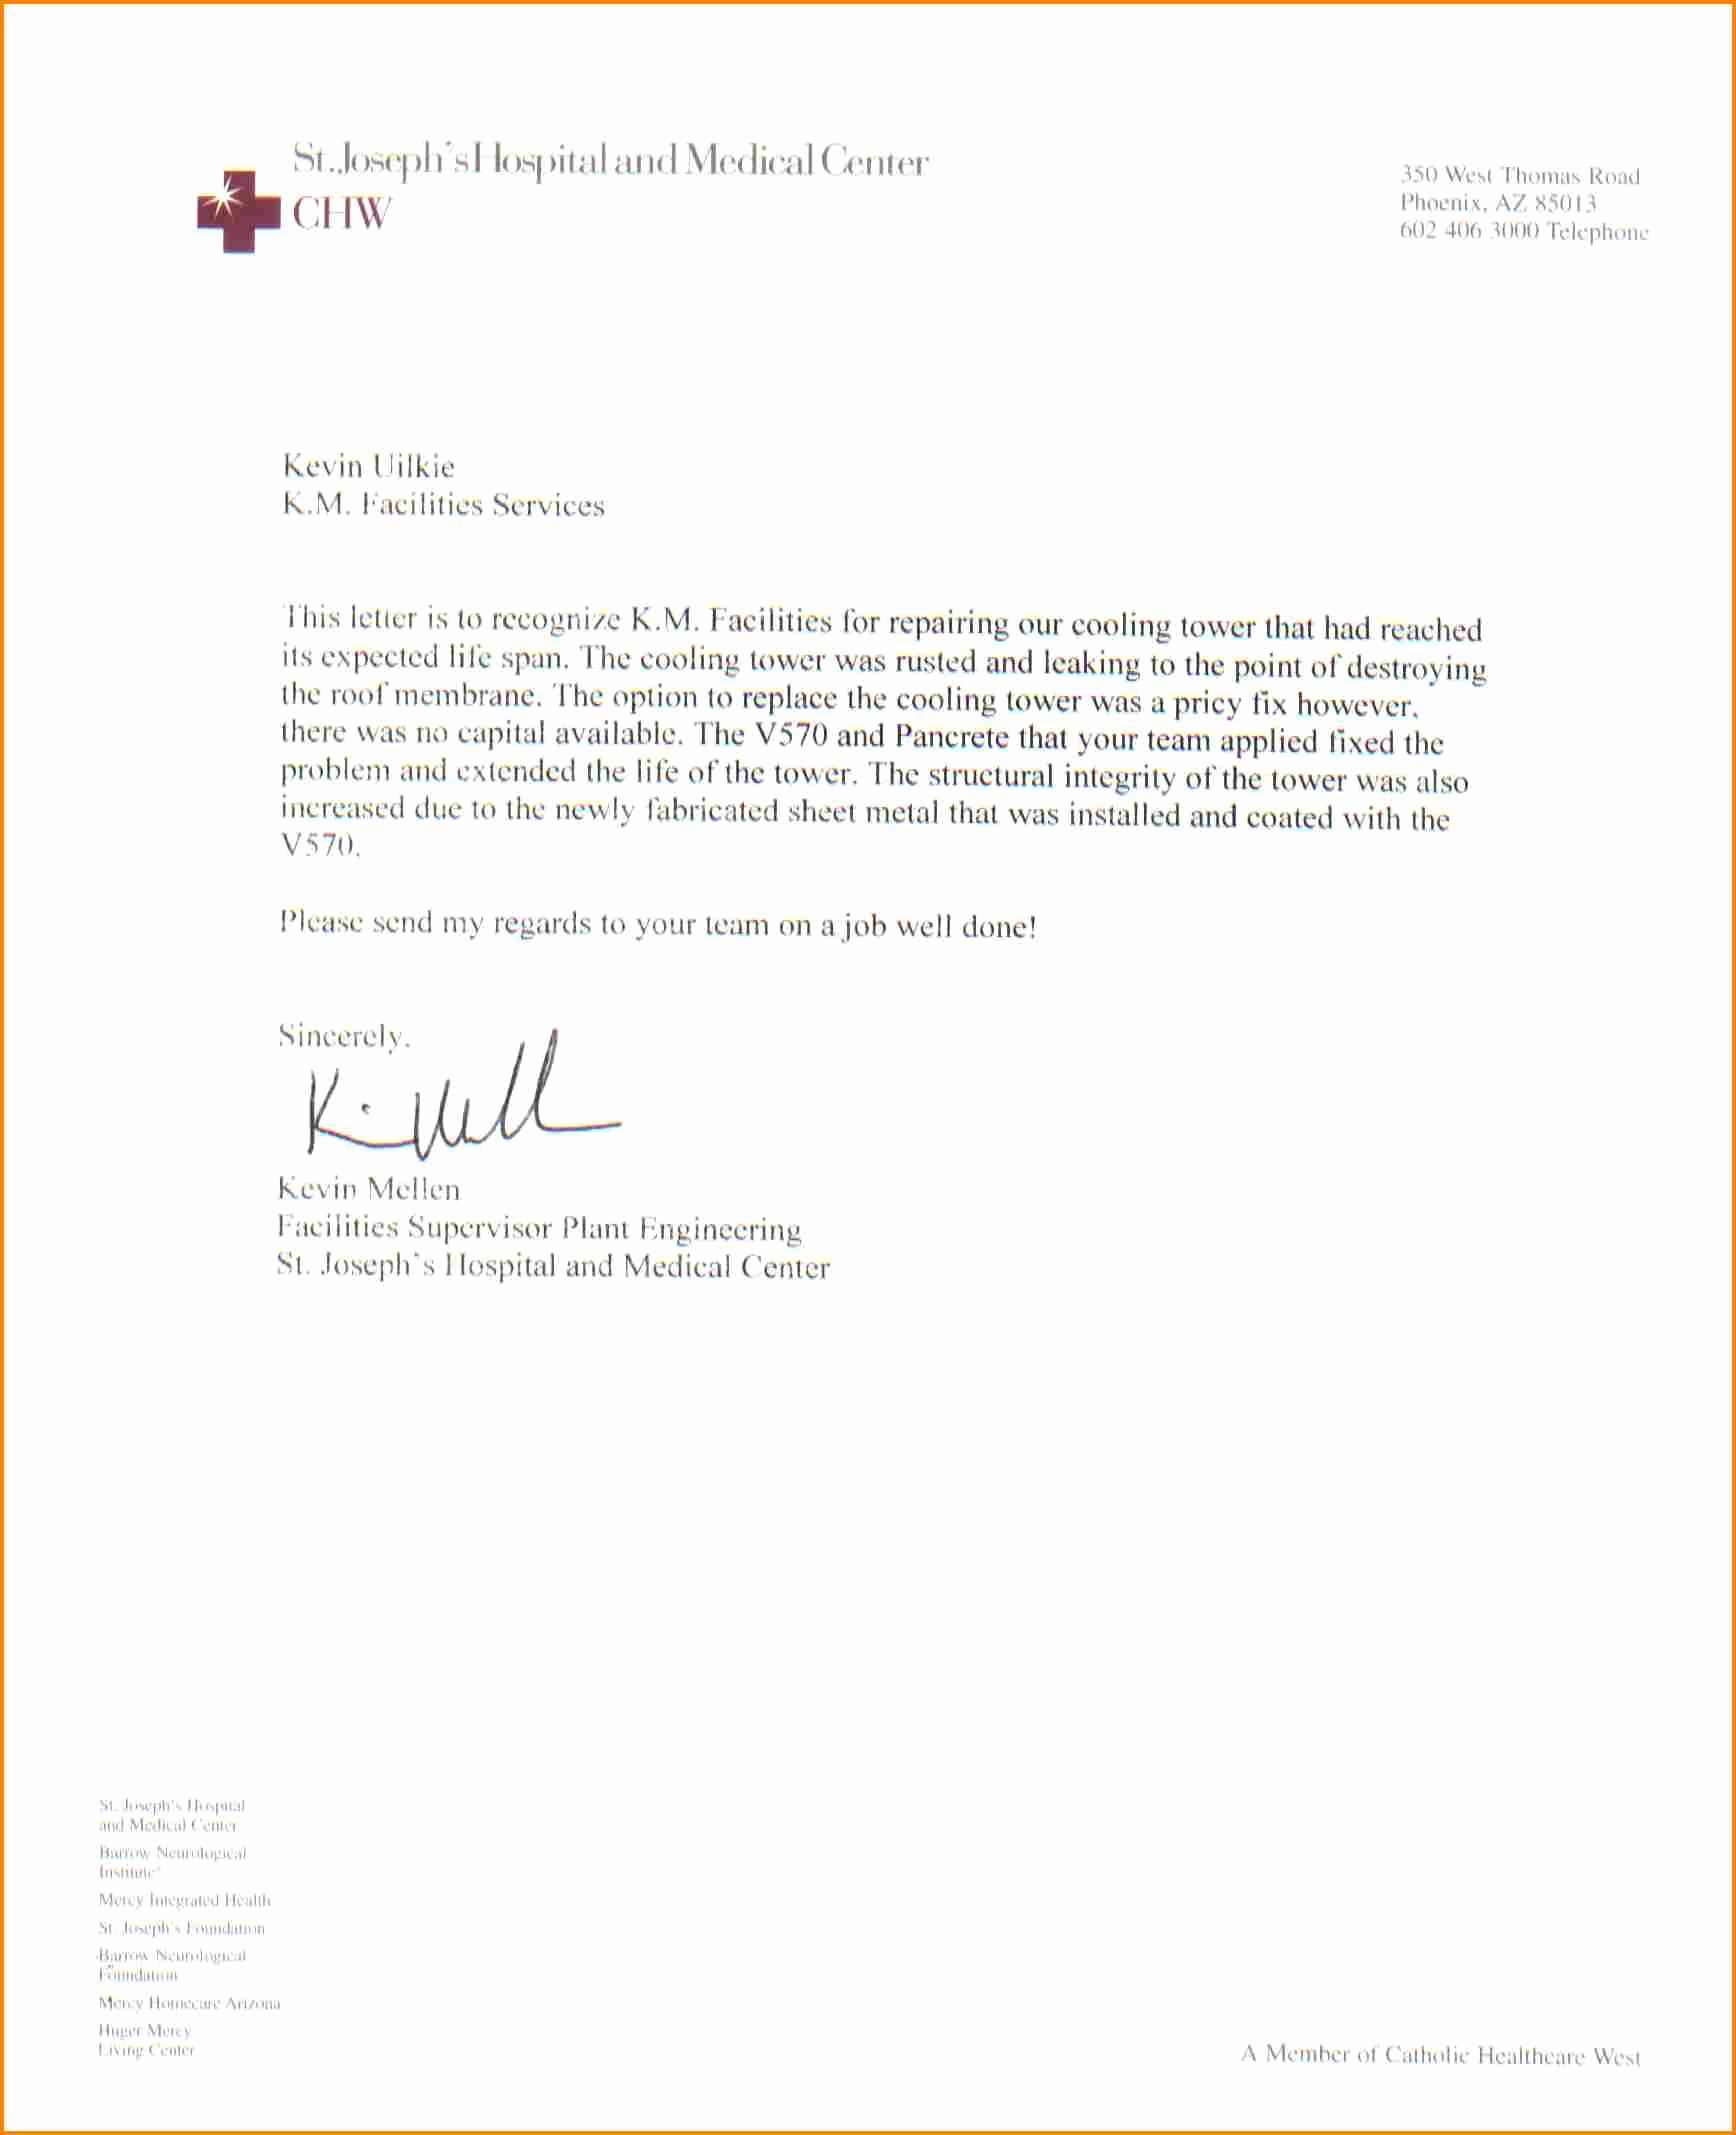 Recommendation Letter for Research Awesome 9 Letter Of Re Mendation for Research assistant